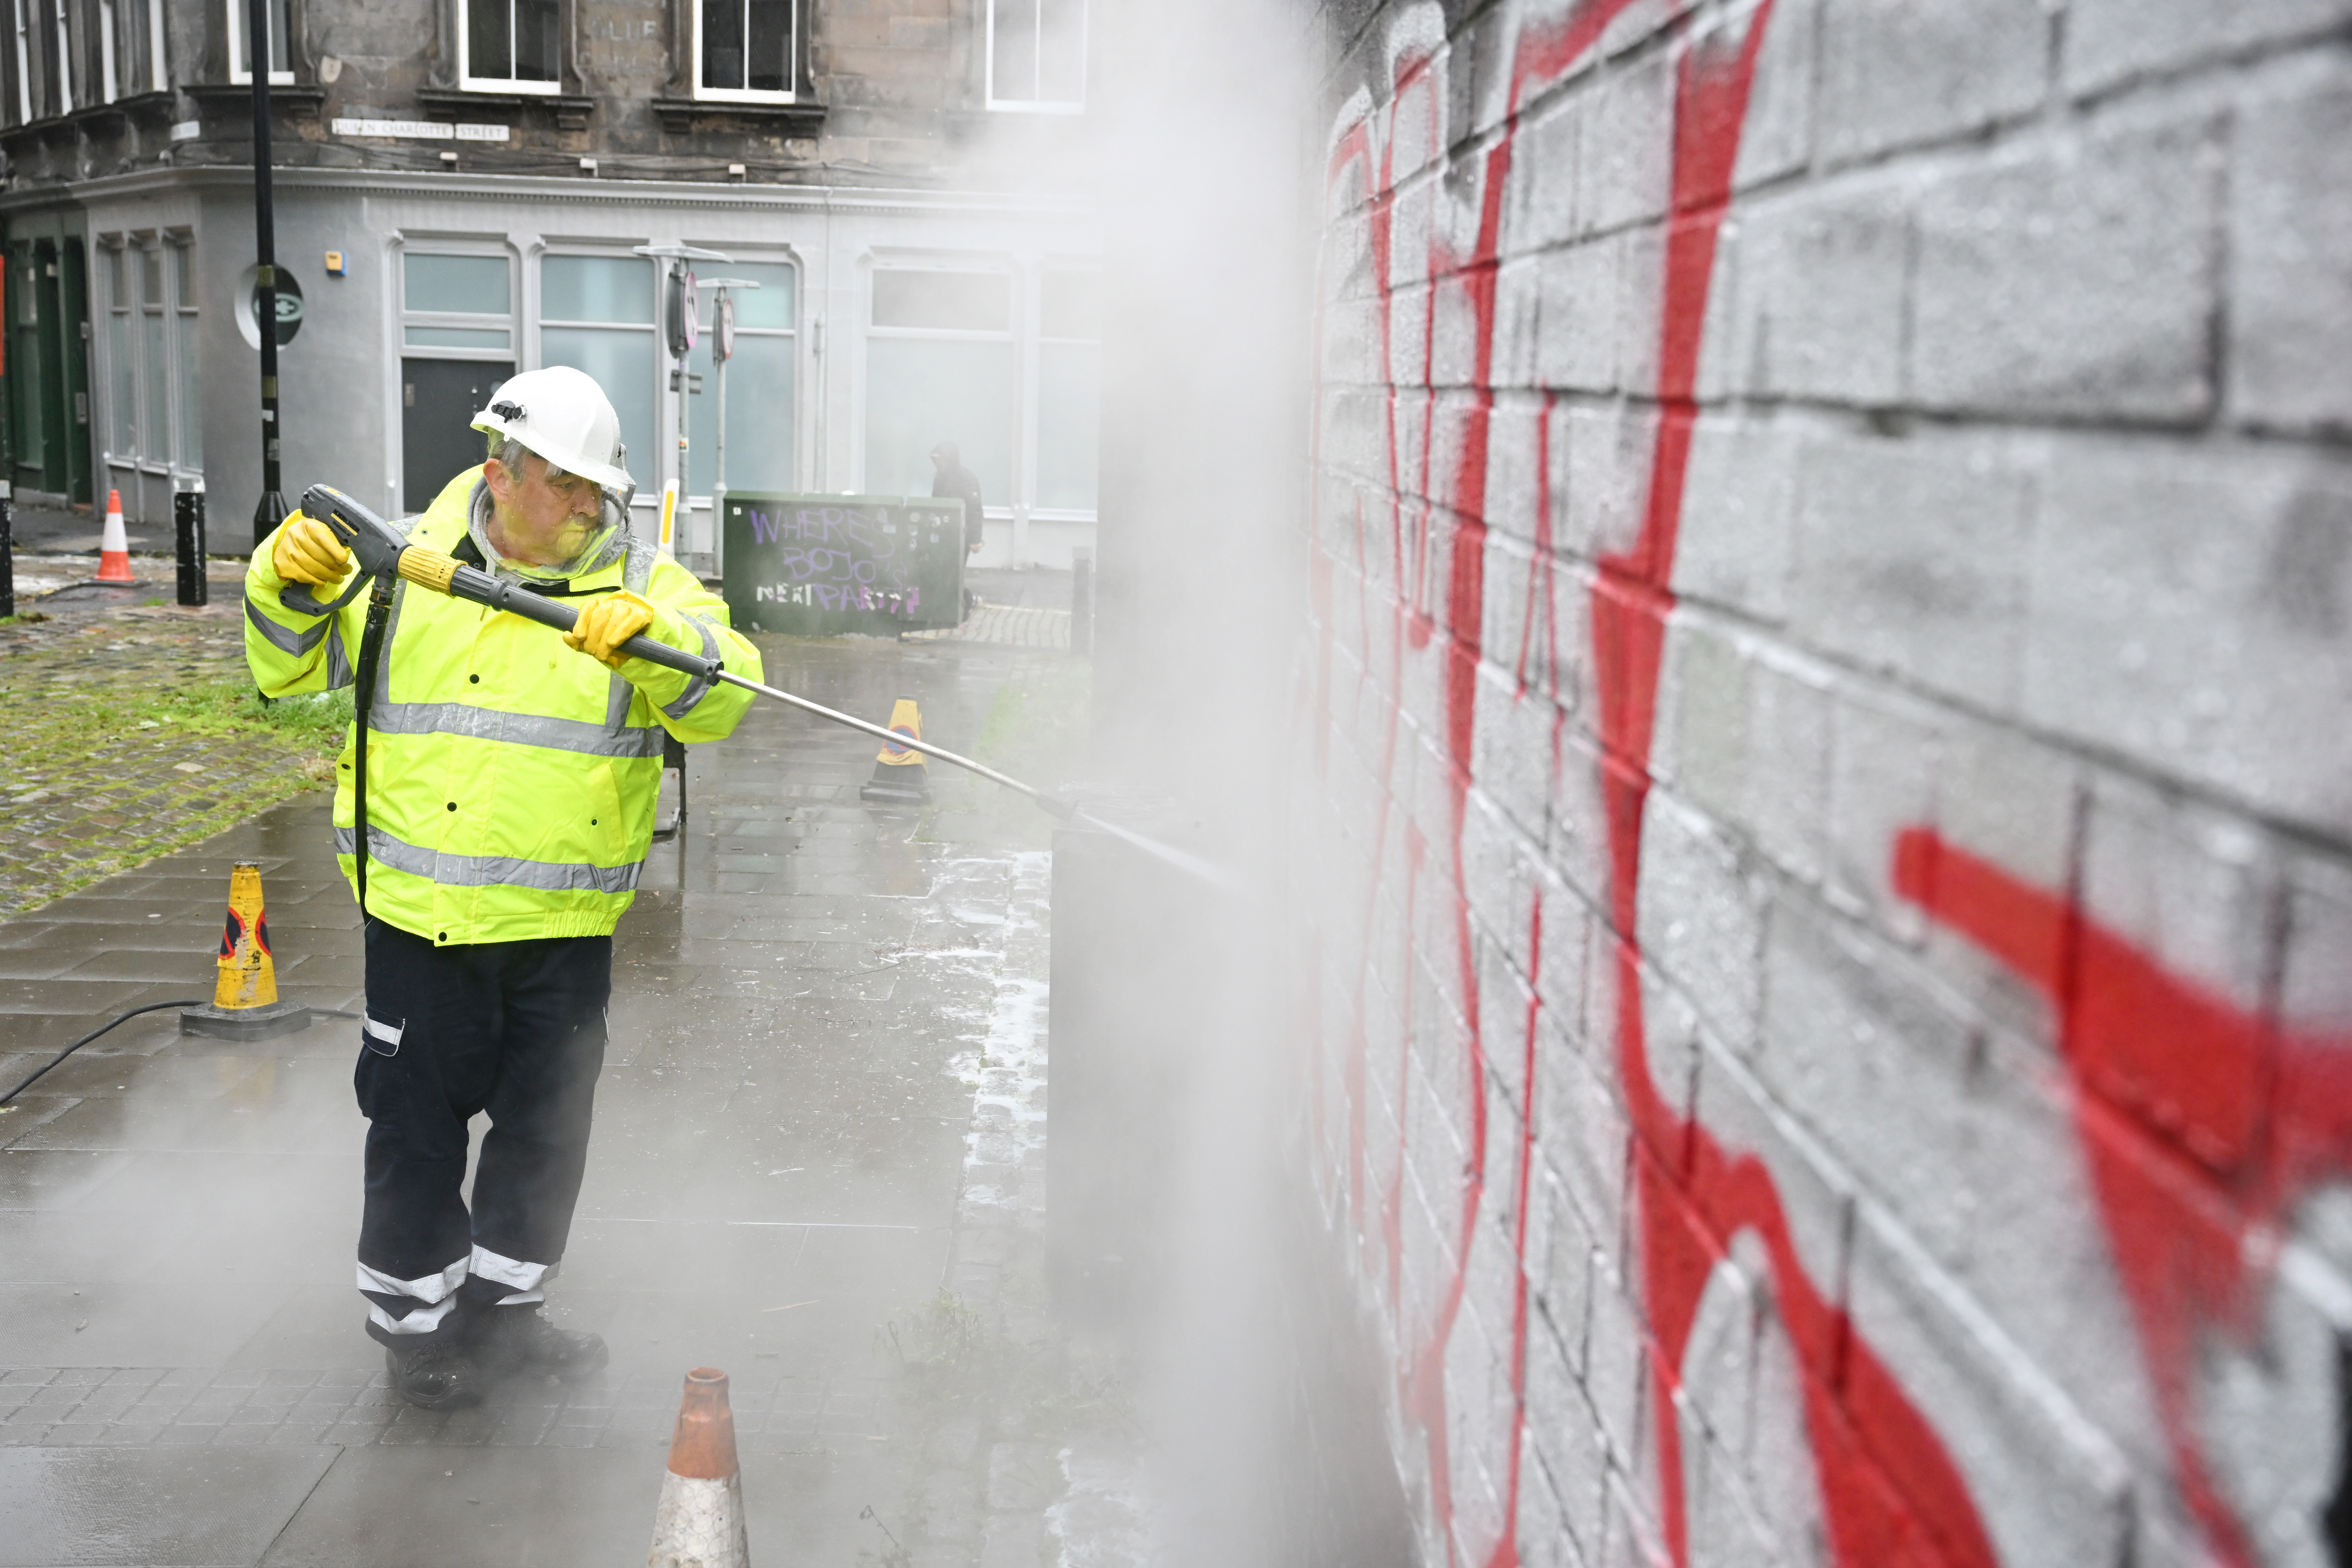 Photograph showing a wall covered in graffiti on the right and a man on the right cleaning the graffiti with a power washer